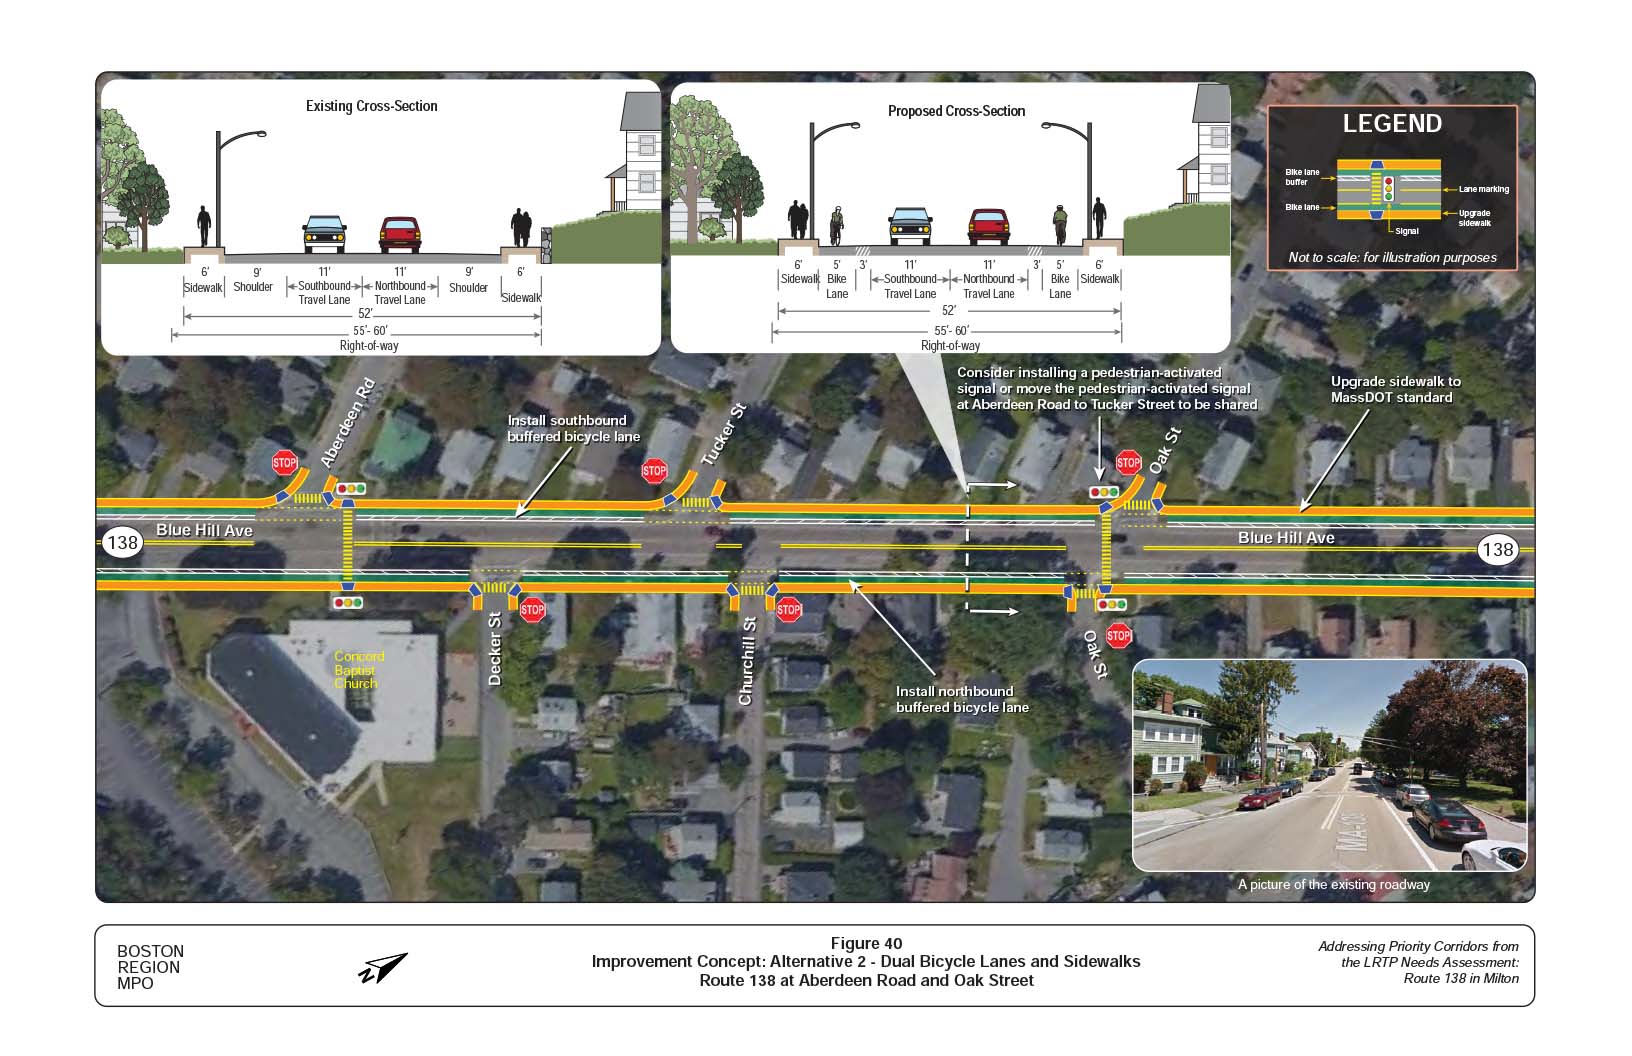 Figure 40 is an aerial photo of Route 138 at Aberdeen Road and Oak Street showing Alternative 2, dual bicycle lanes and sidewalks, and overlays showing the existing and proposed cross-sections.